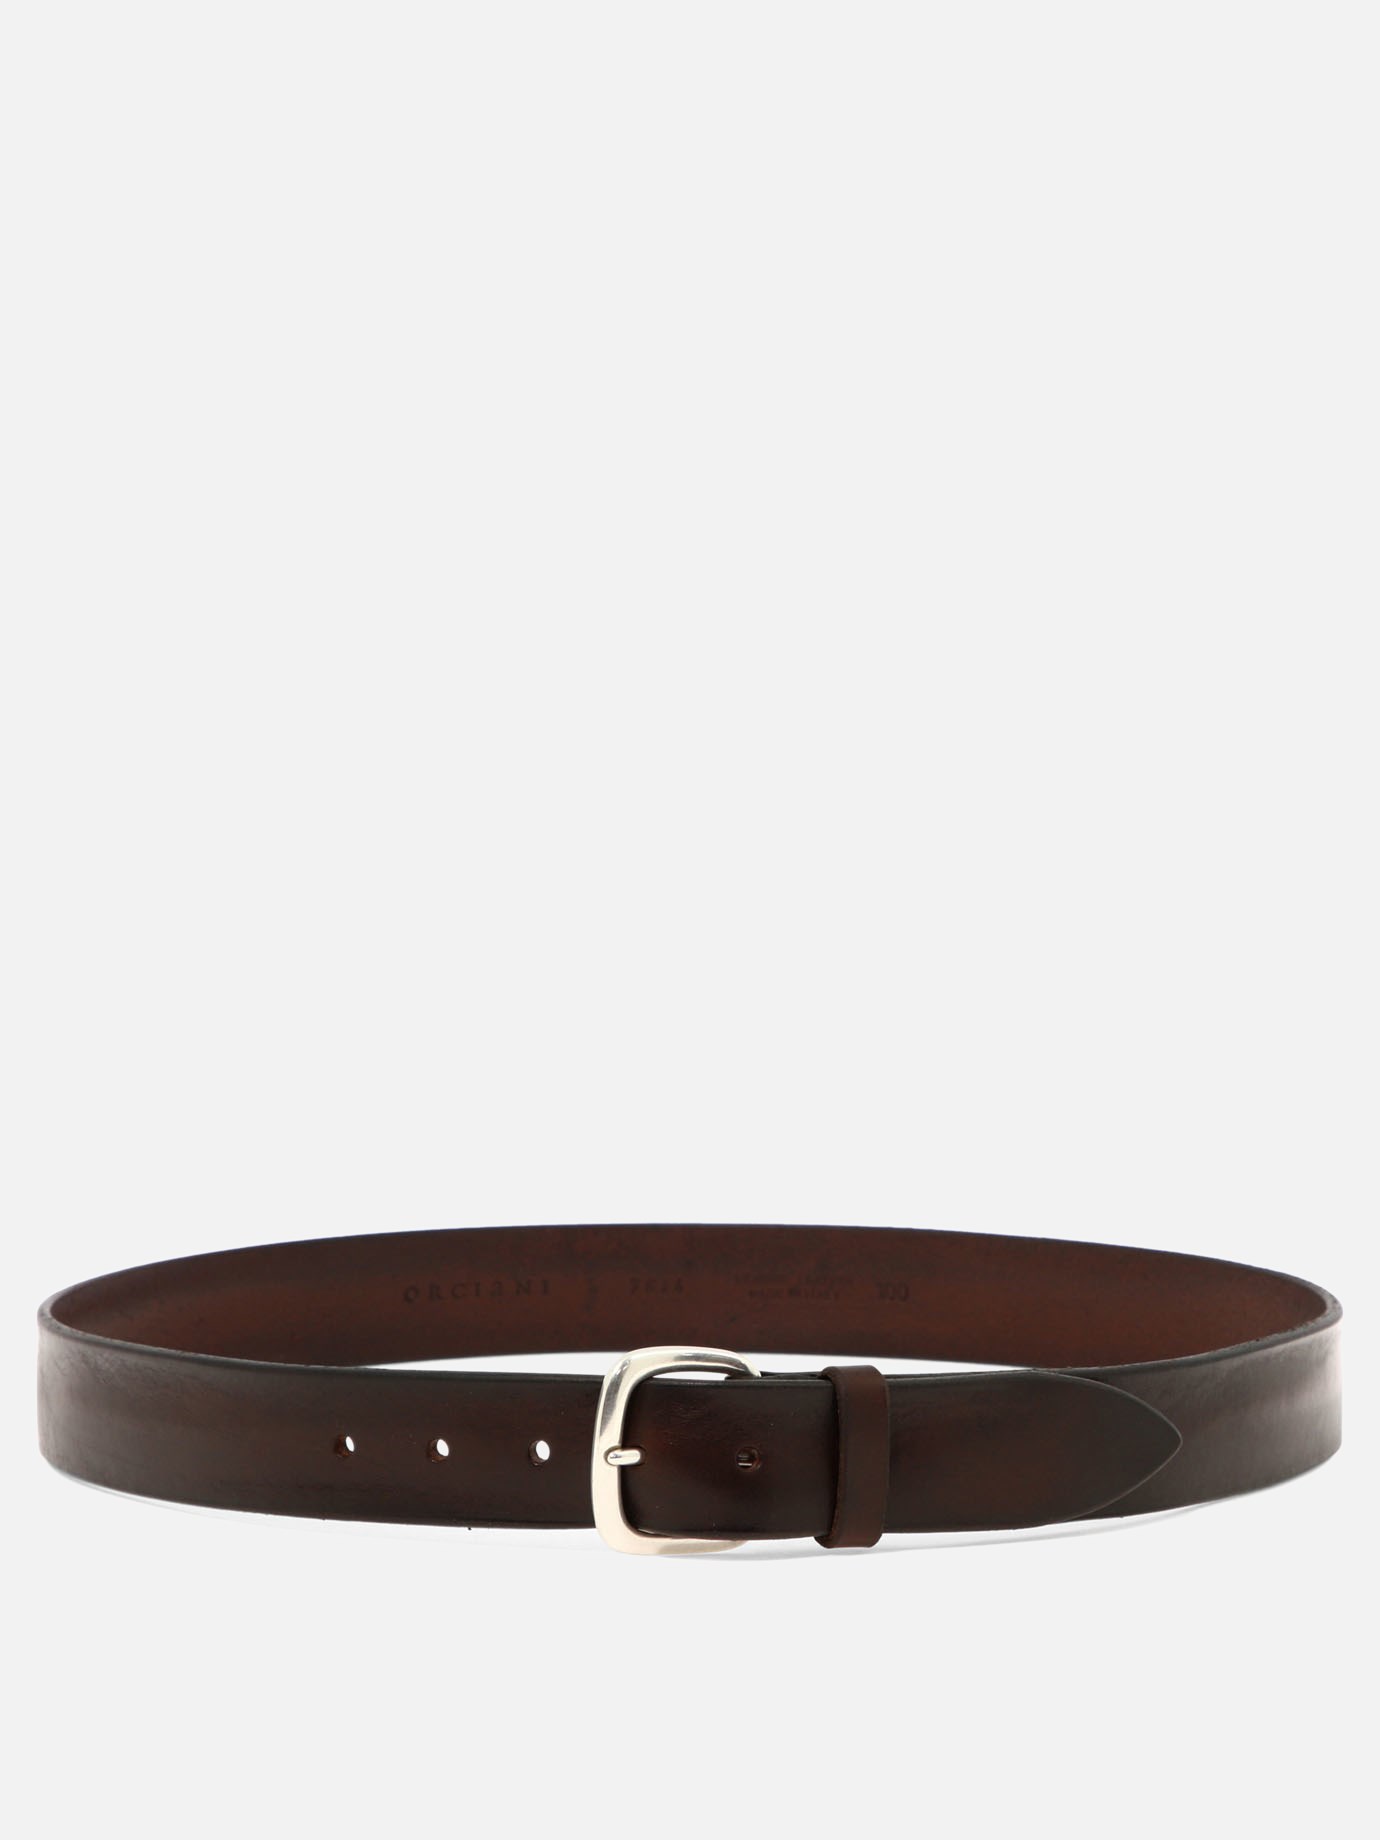  Bull Soft  beltby Orciani - 0